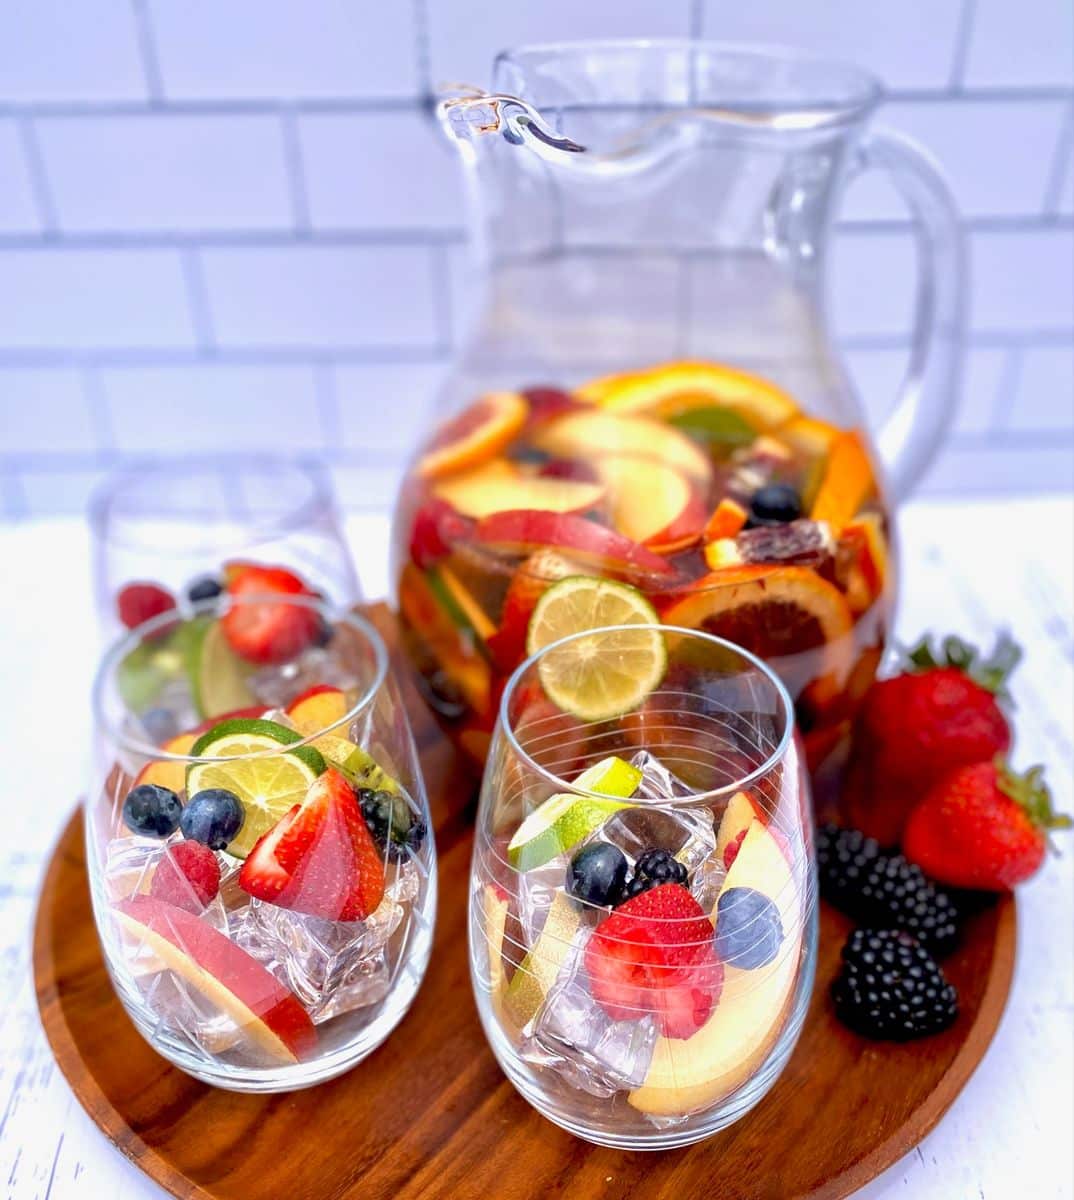 White Sangria Recipe - The Art of Food and Wine